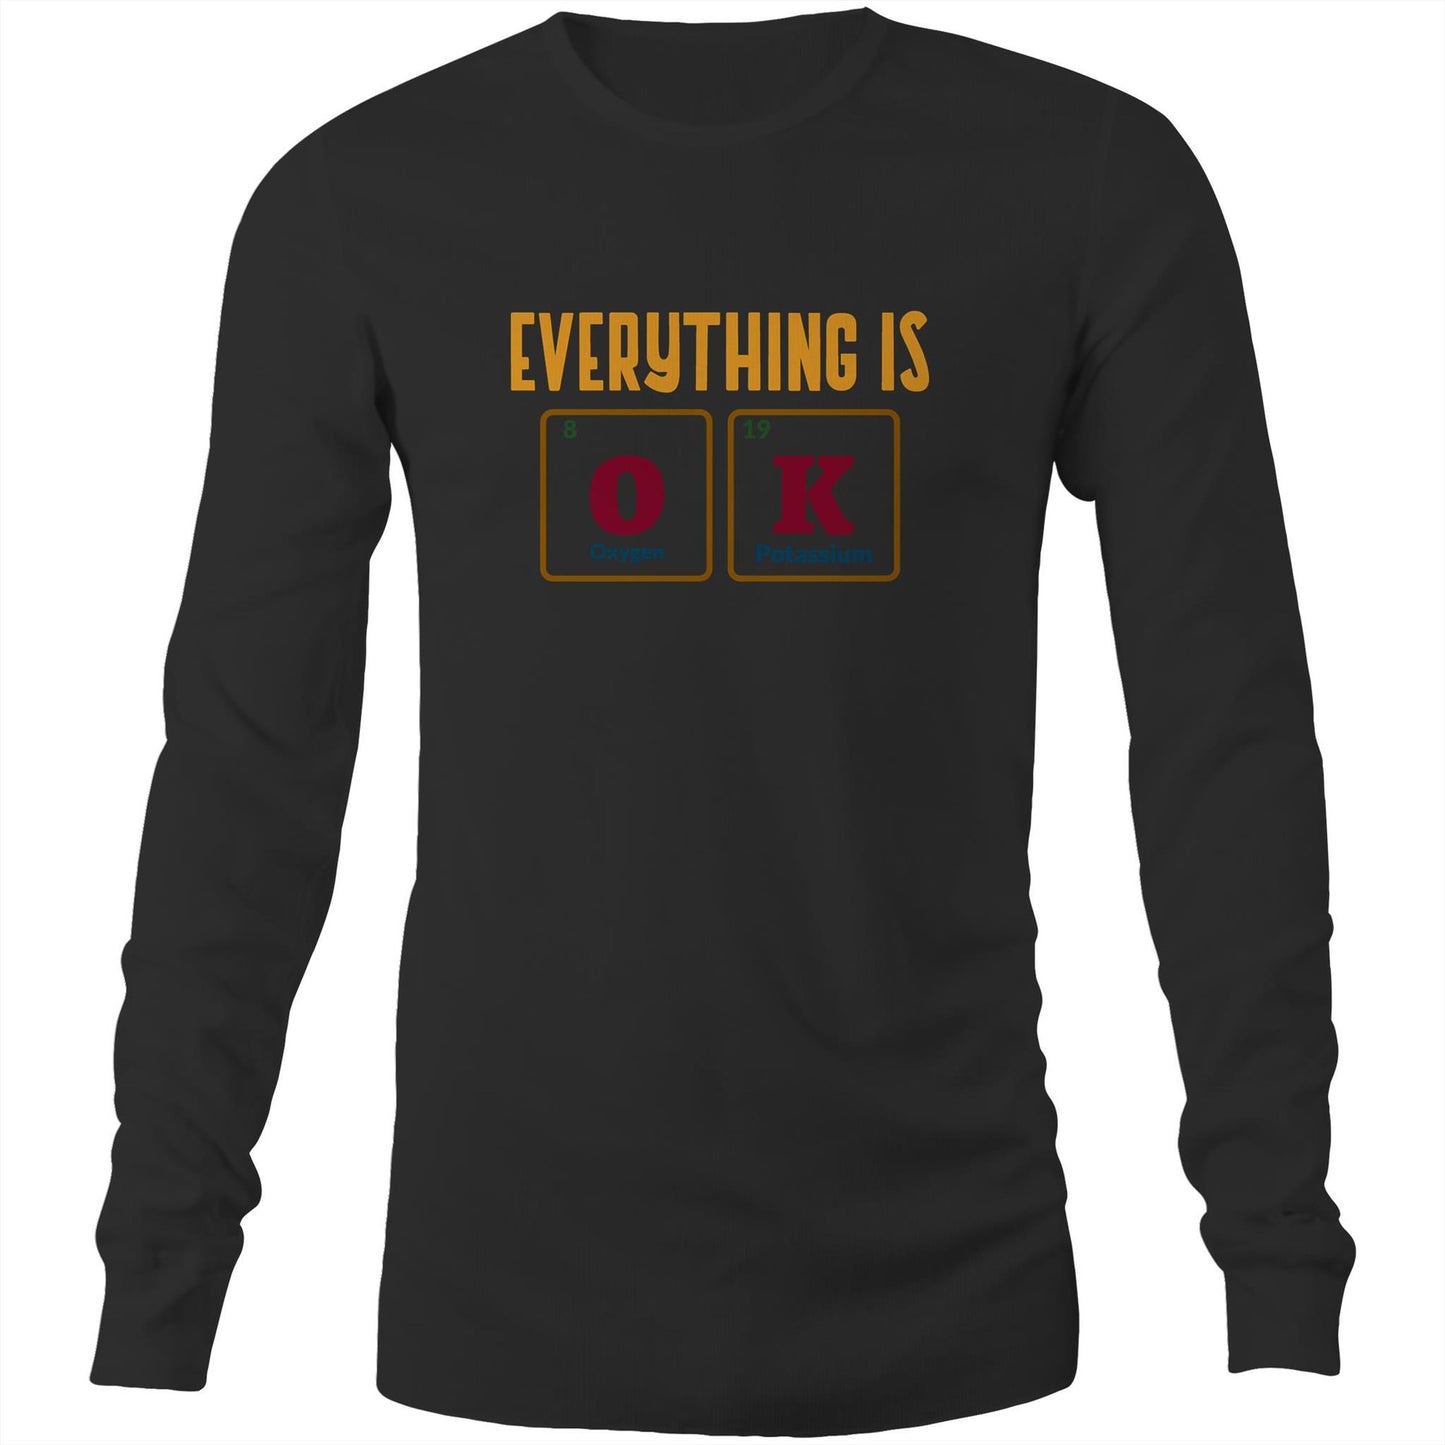 Everything Is OK, Periodic Table Of Elements - Long Sleeve T-Shirt Black Unisex Long Sleeve T-shirt Science